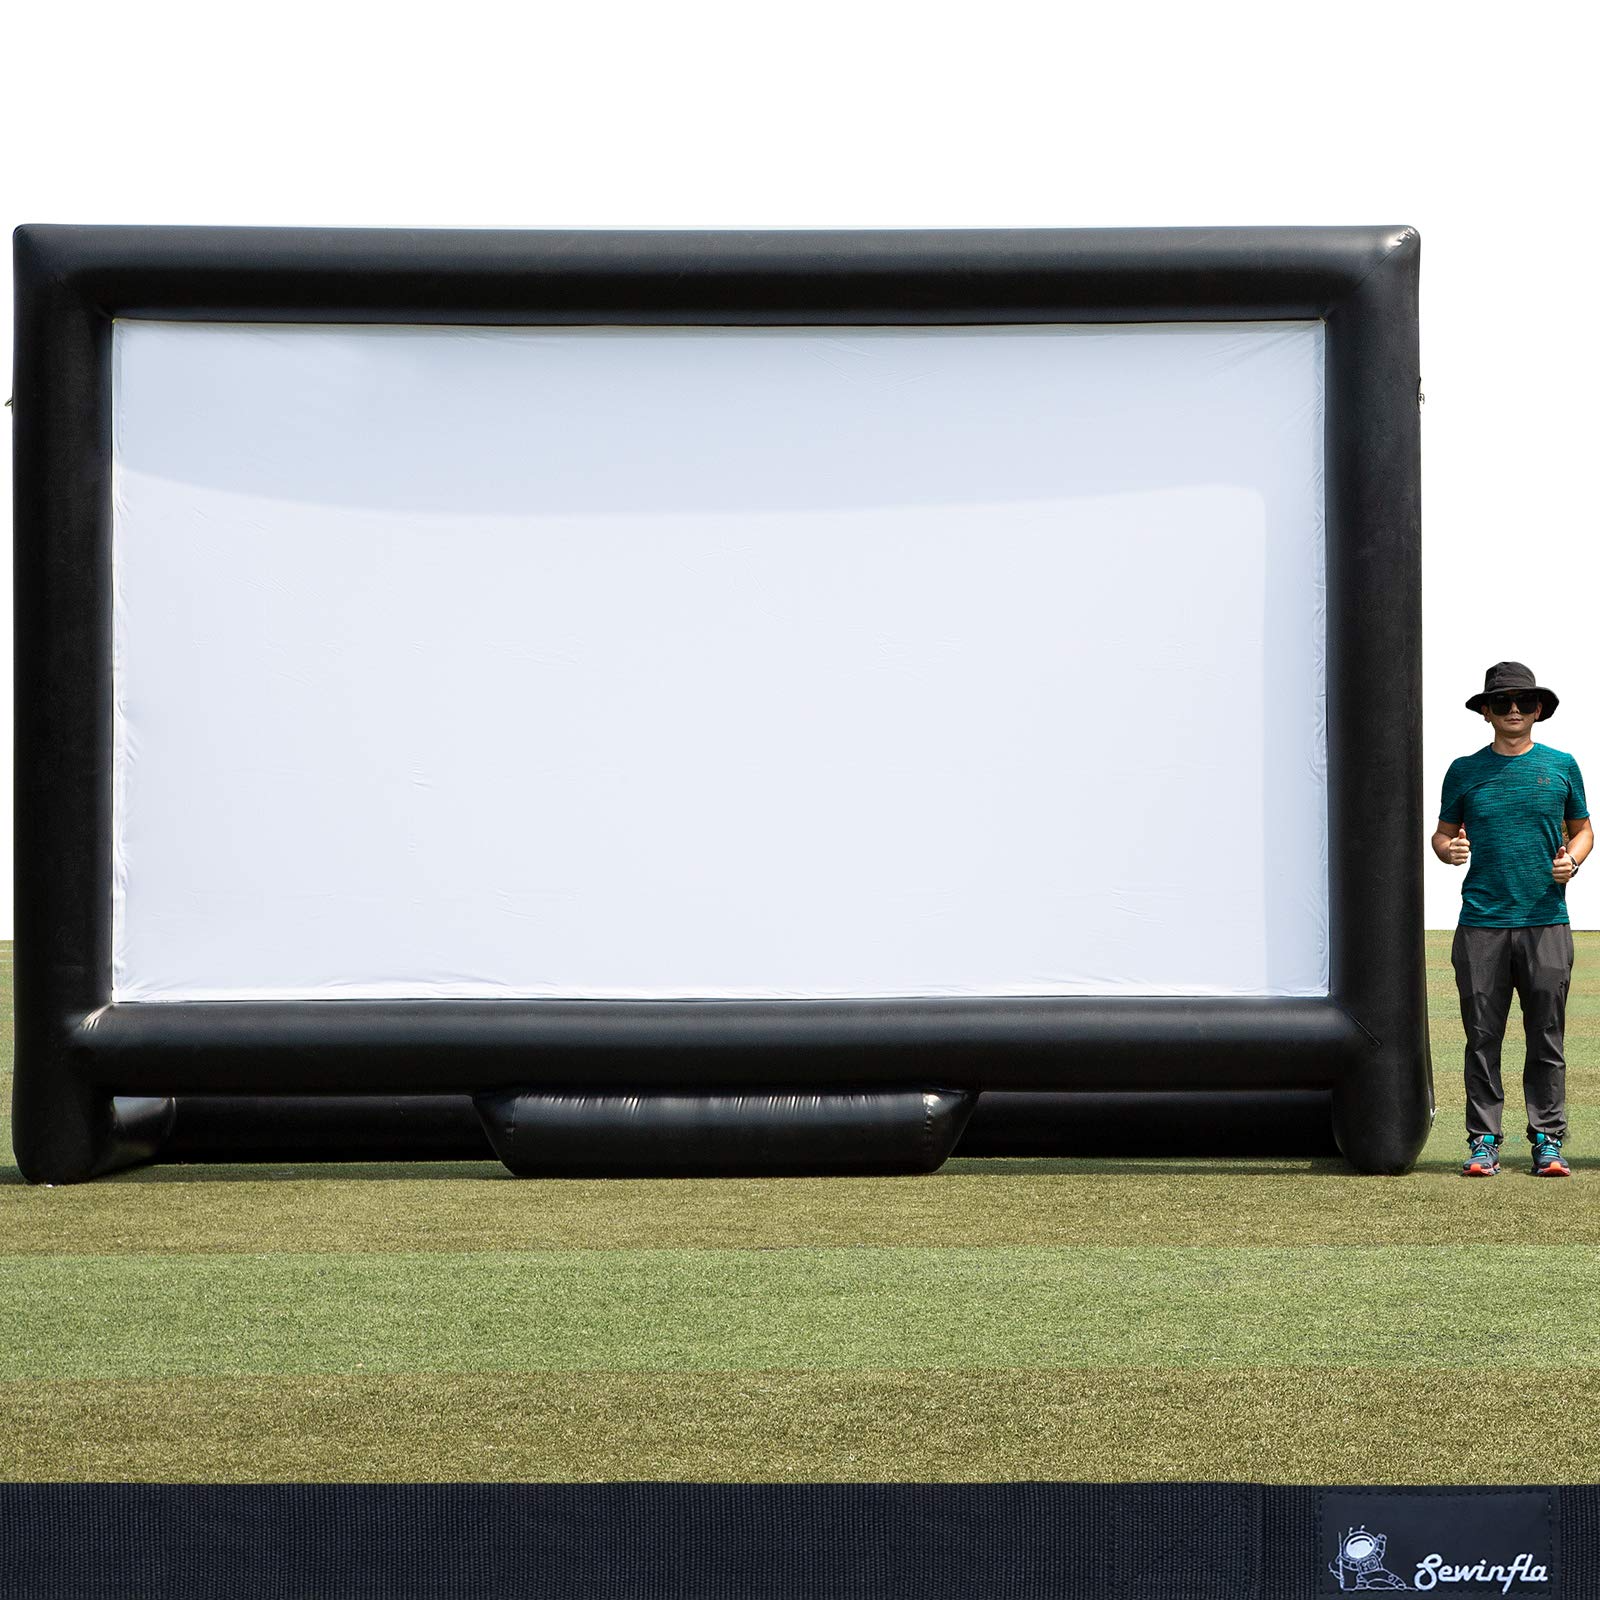 Sewinfla Upgraded Airtight Inflatable Movie Projector Screen 19ft- Outdoor Movie Screen - No Need to Keep Inflating - Supports Front and Rear Projection